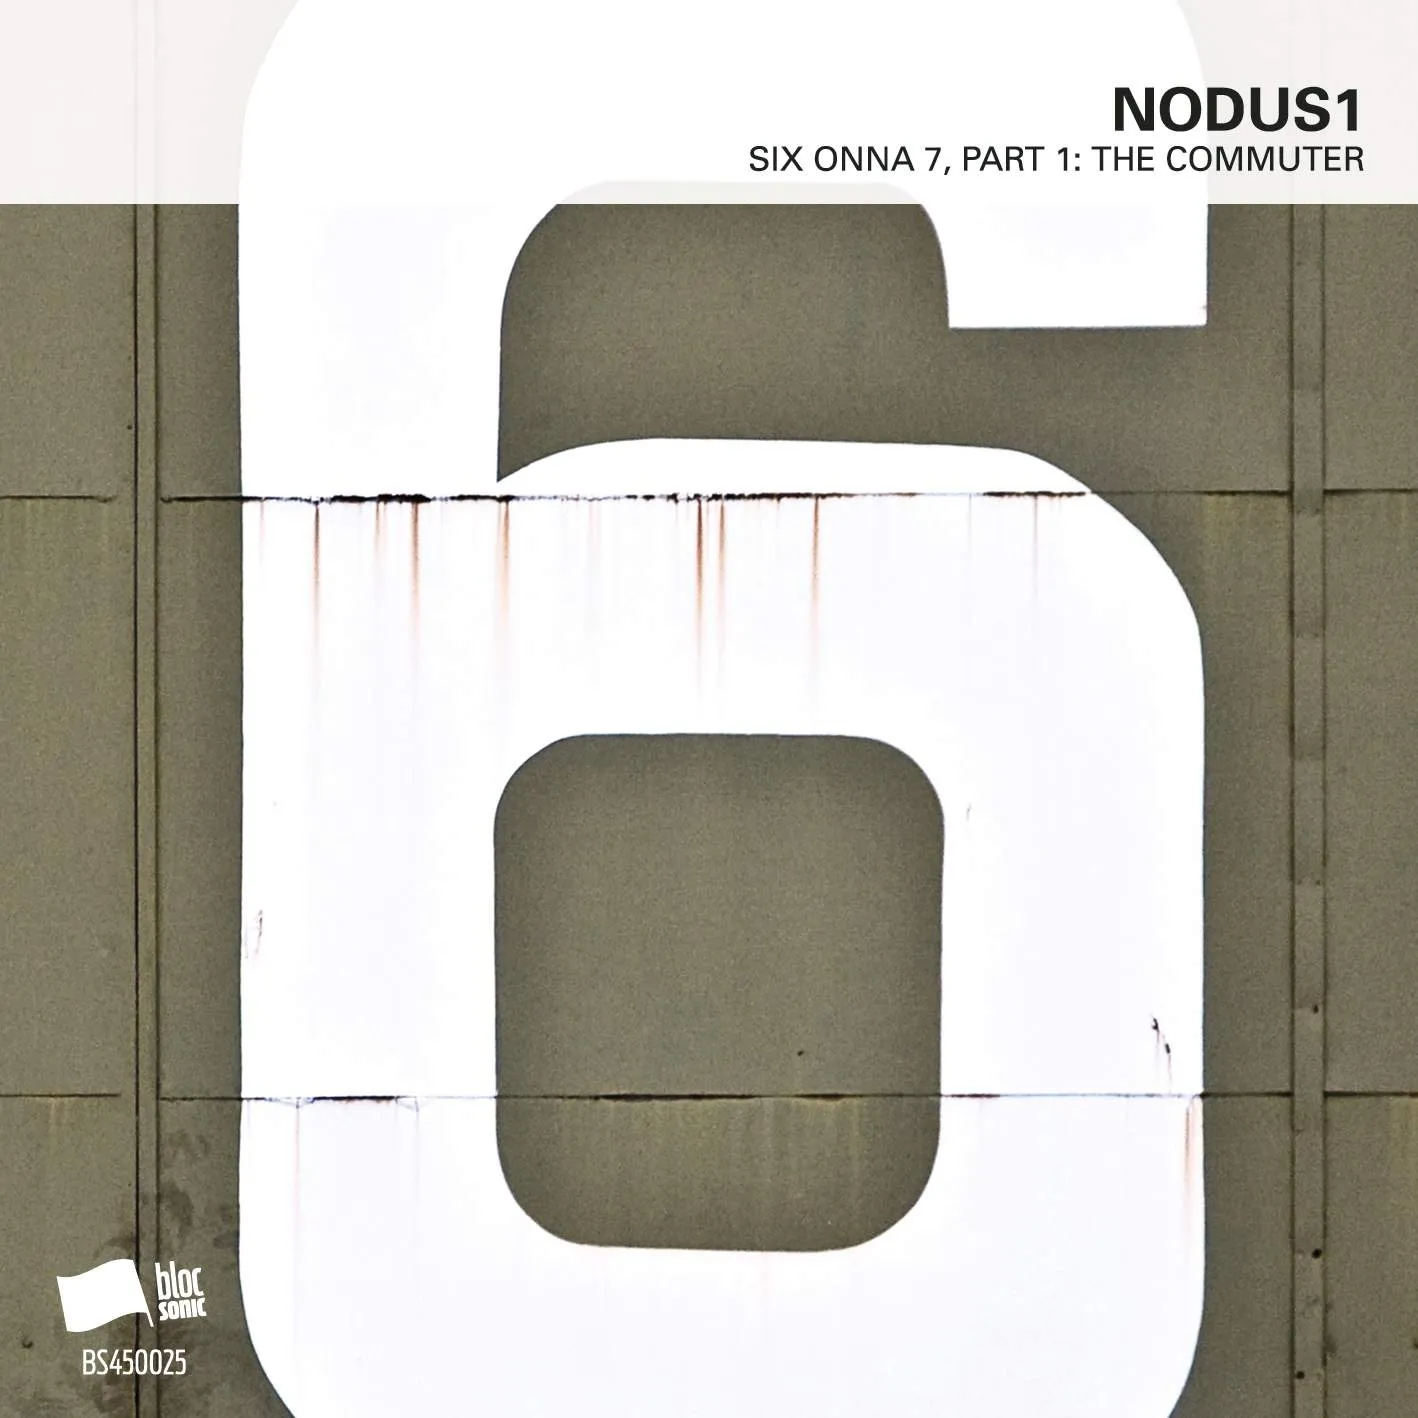 Album cover for “SIX ONNA 7, Part 1: The Commuter” by Nodus1